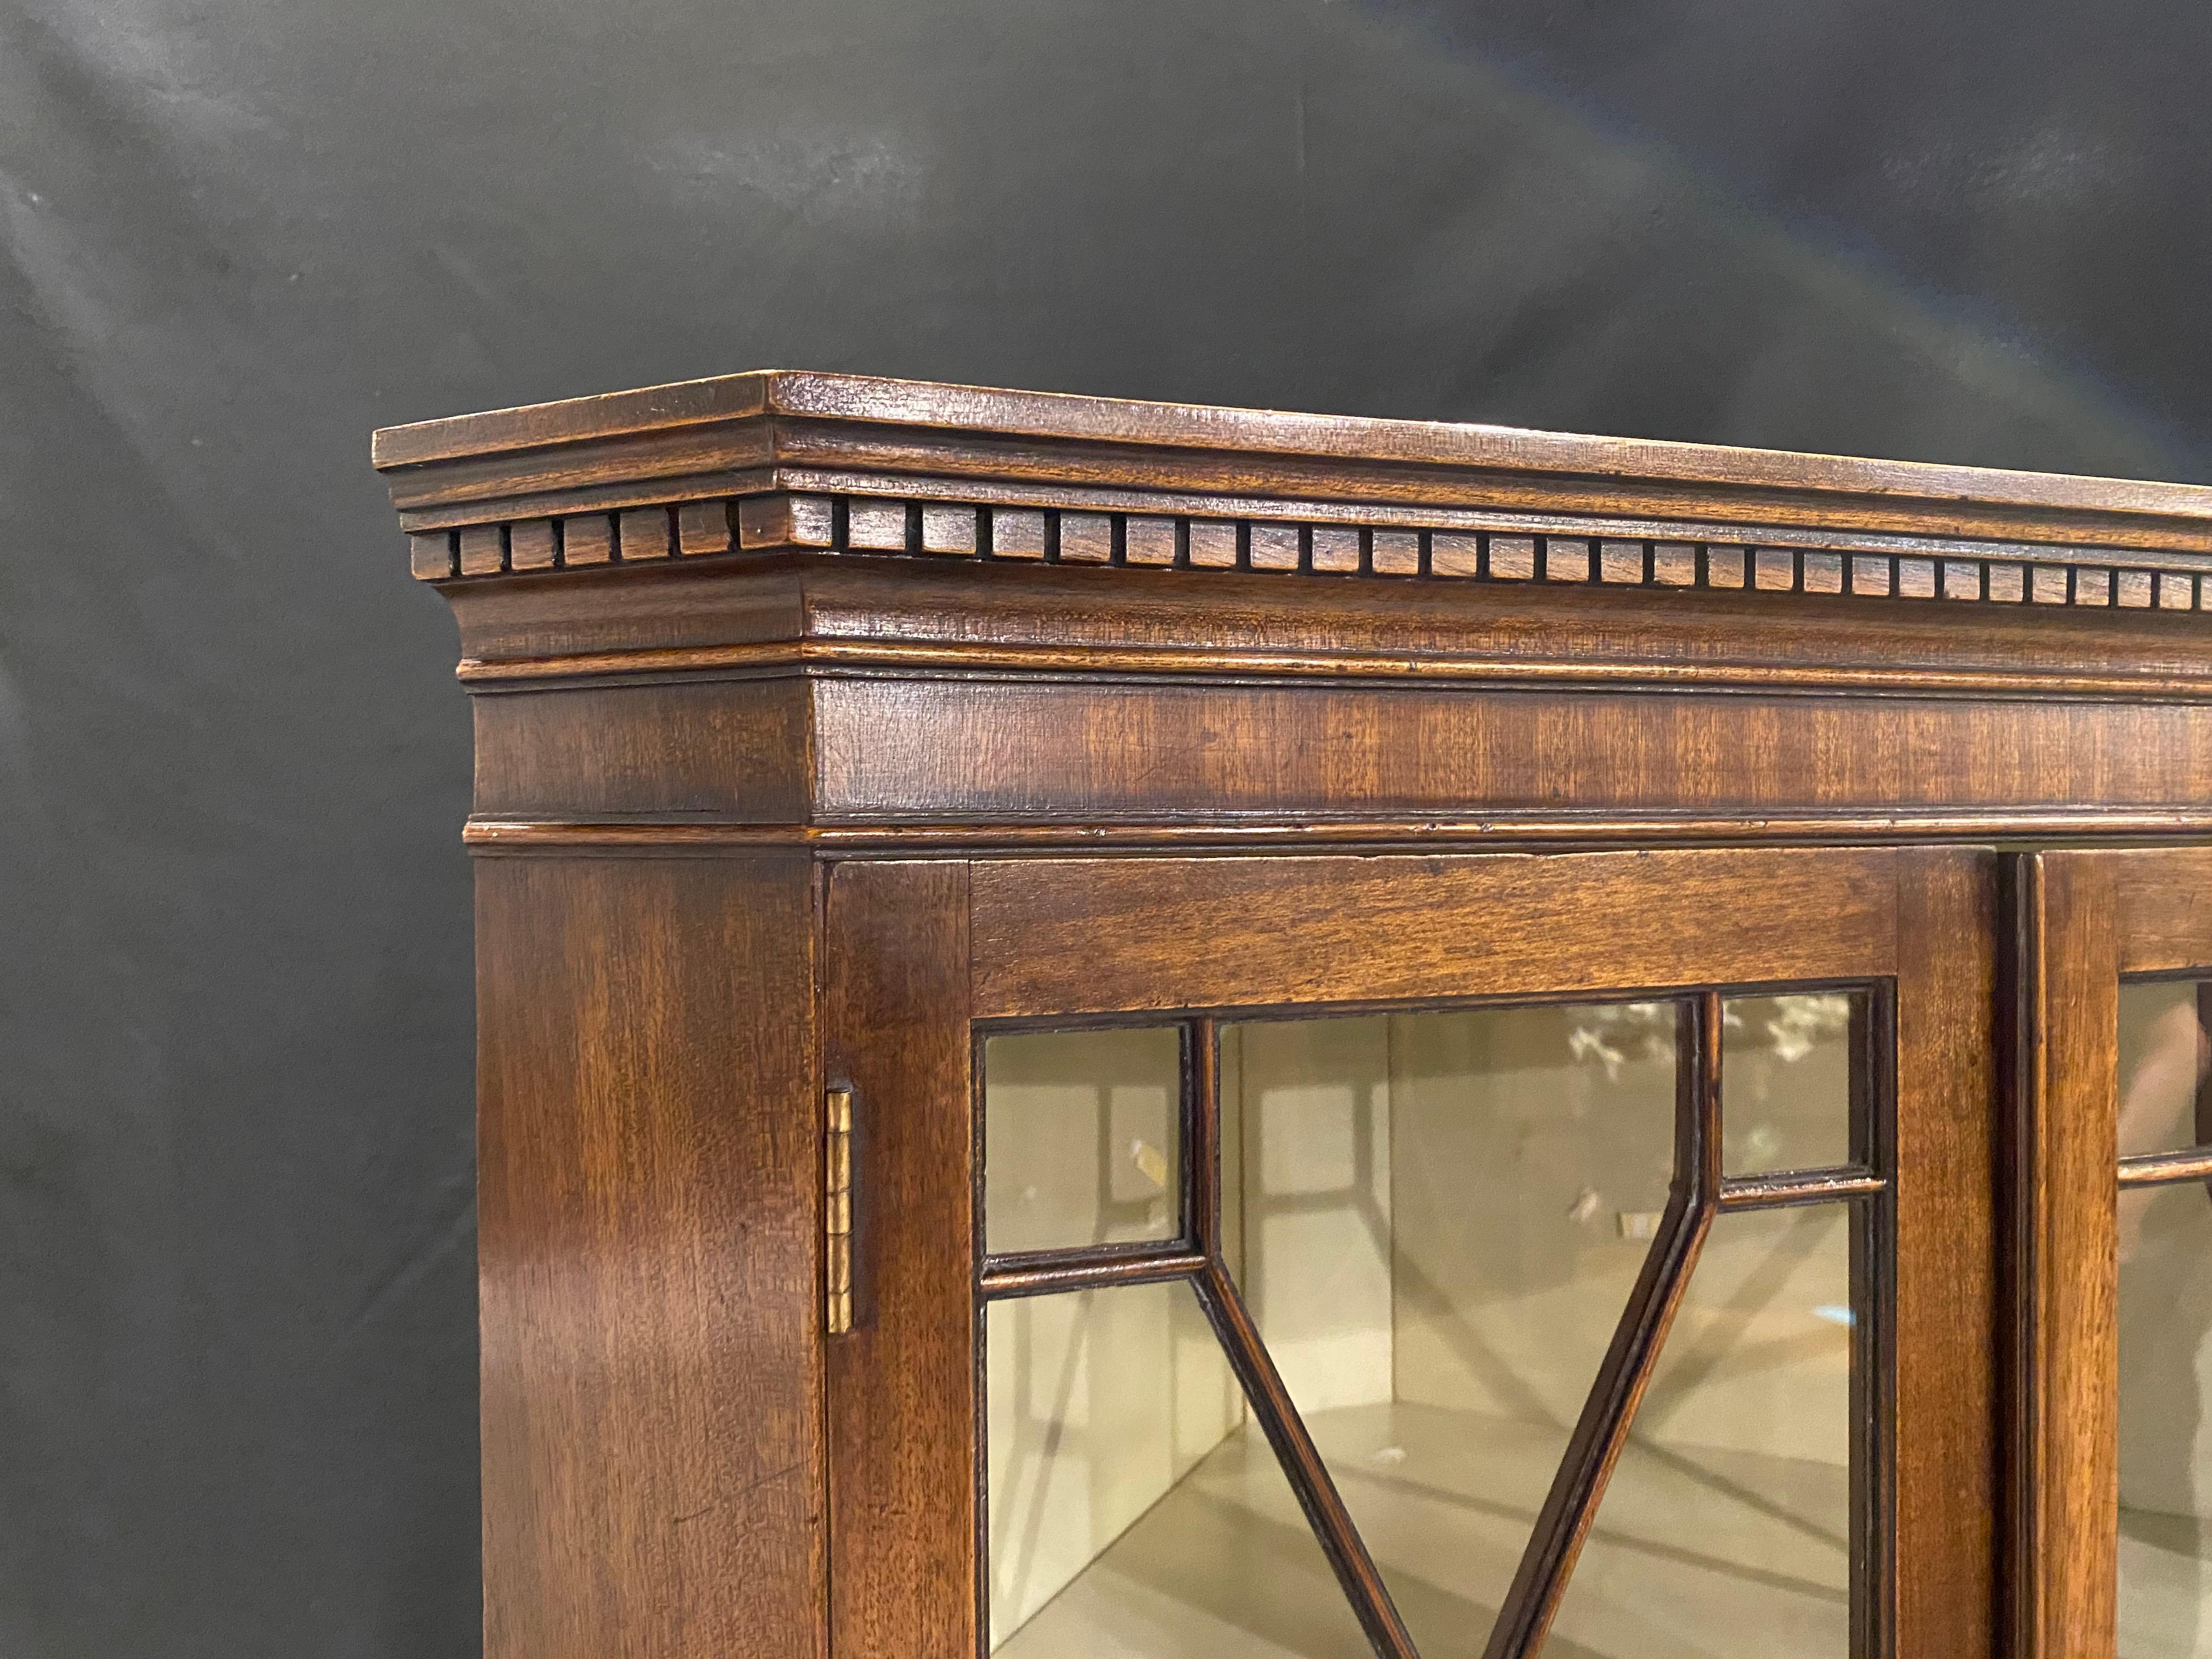 This is a lovely mahogany corner cabinet in the 18th century Georgian styling. The top has two glass doors with 13 panels of hand glazed glass panels in each door. Behind which is a cream finish interior that lightens the interior to contrast the